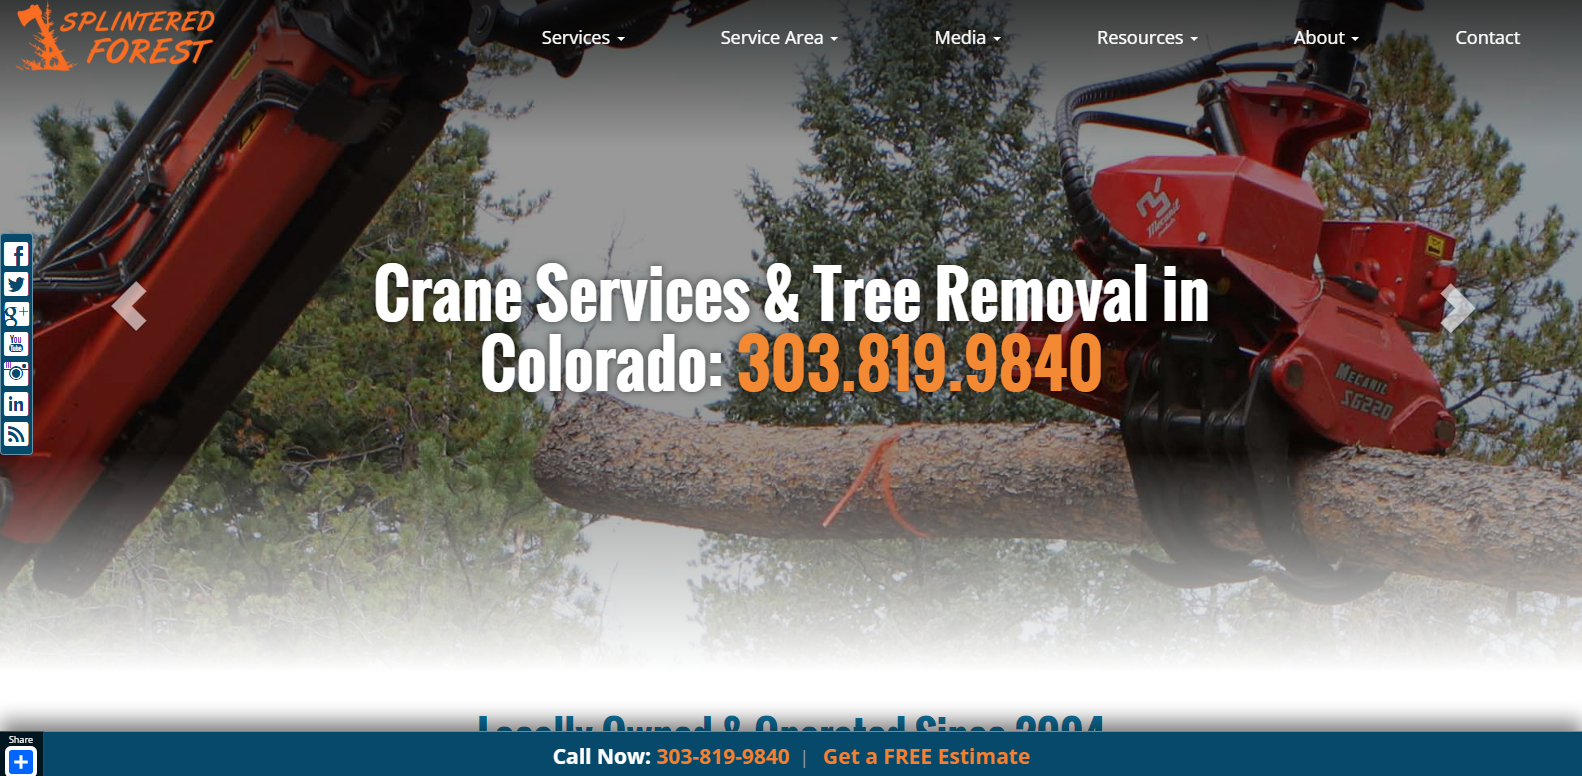 
New Website Launched: Splintered Forest Tree Services